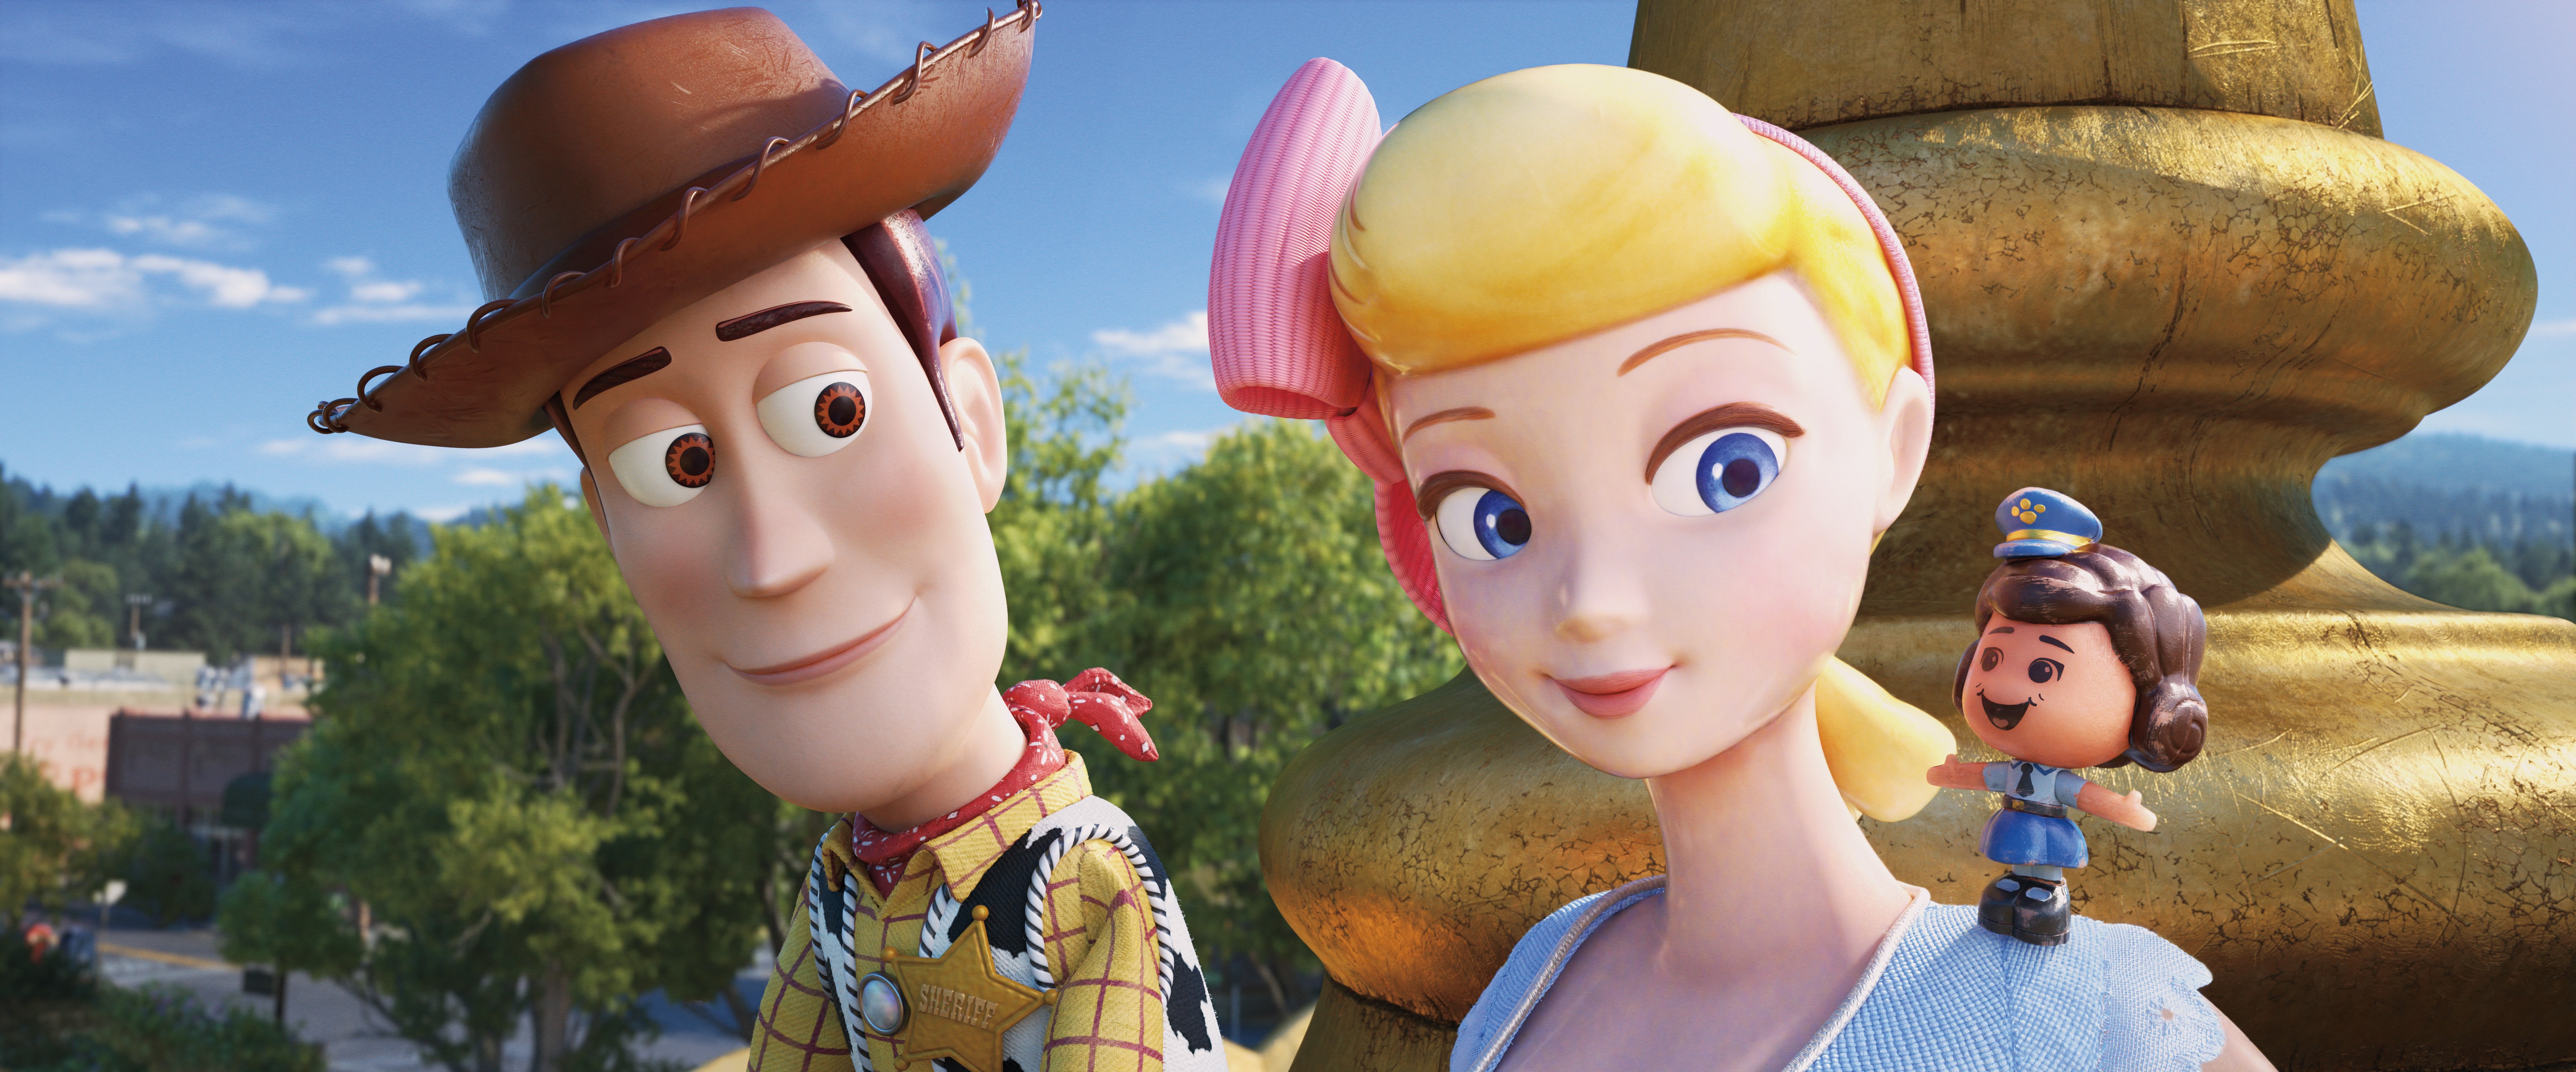 GIGGLE MCDIMPLES -- In Disney•Pixar’s “Toy Story 4,” Bo Peep introduces Woody to her best friend Giggle McDimples. A miniature plastic doll from the 1980s, Giggle is Bo’s confidant, supporter and advisor, and spends a lot of her time perched on Bo’s shoul (Foto: Divulgação)